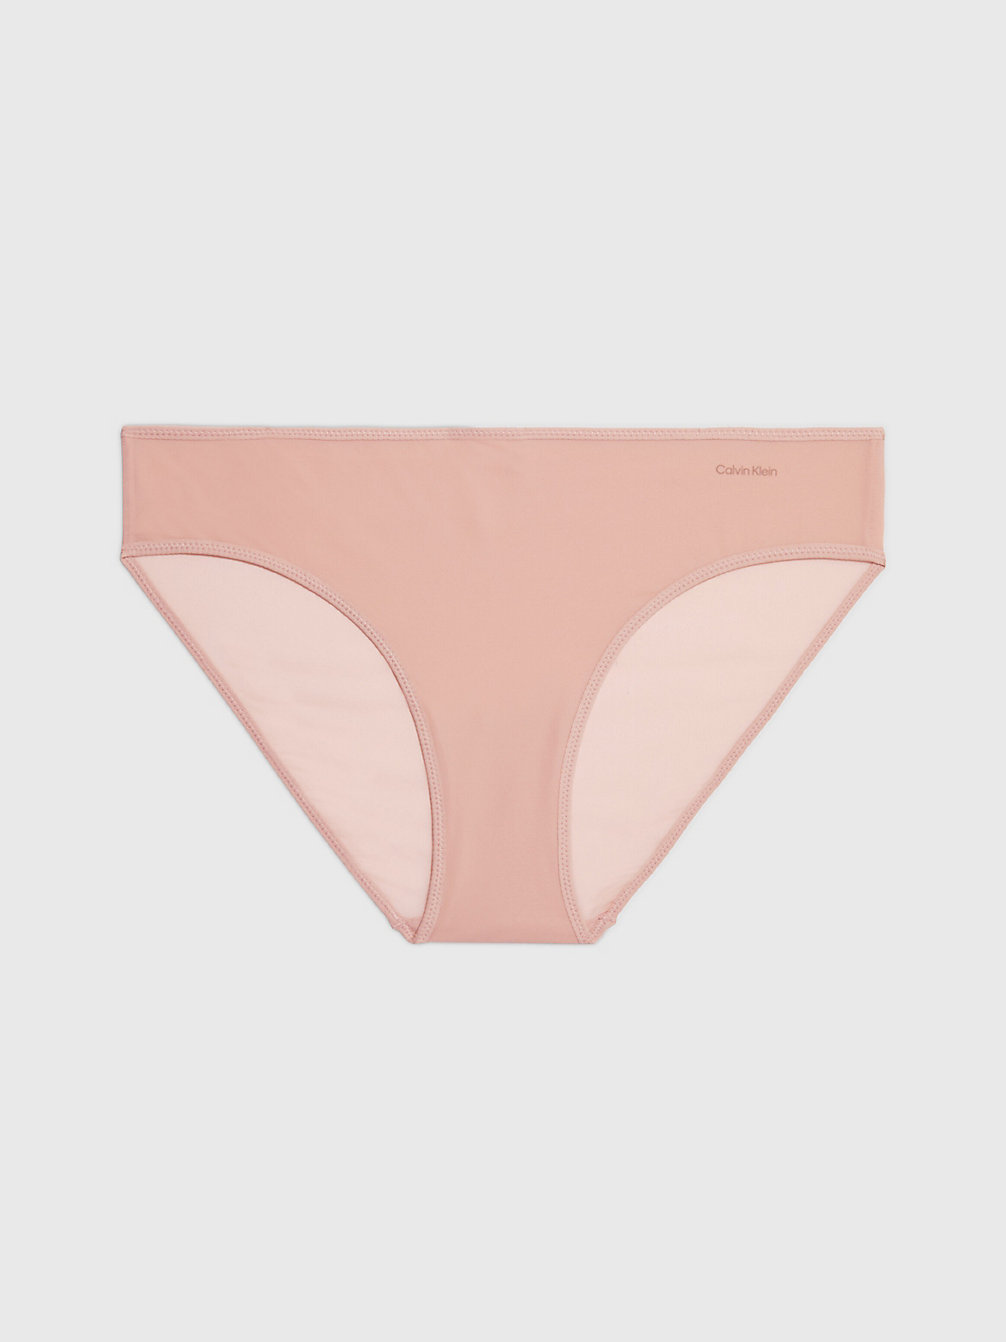 SUBDUED Culotte - Sheer Marquisette undefined femmes Calvin Klein